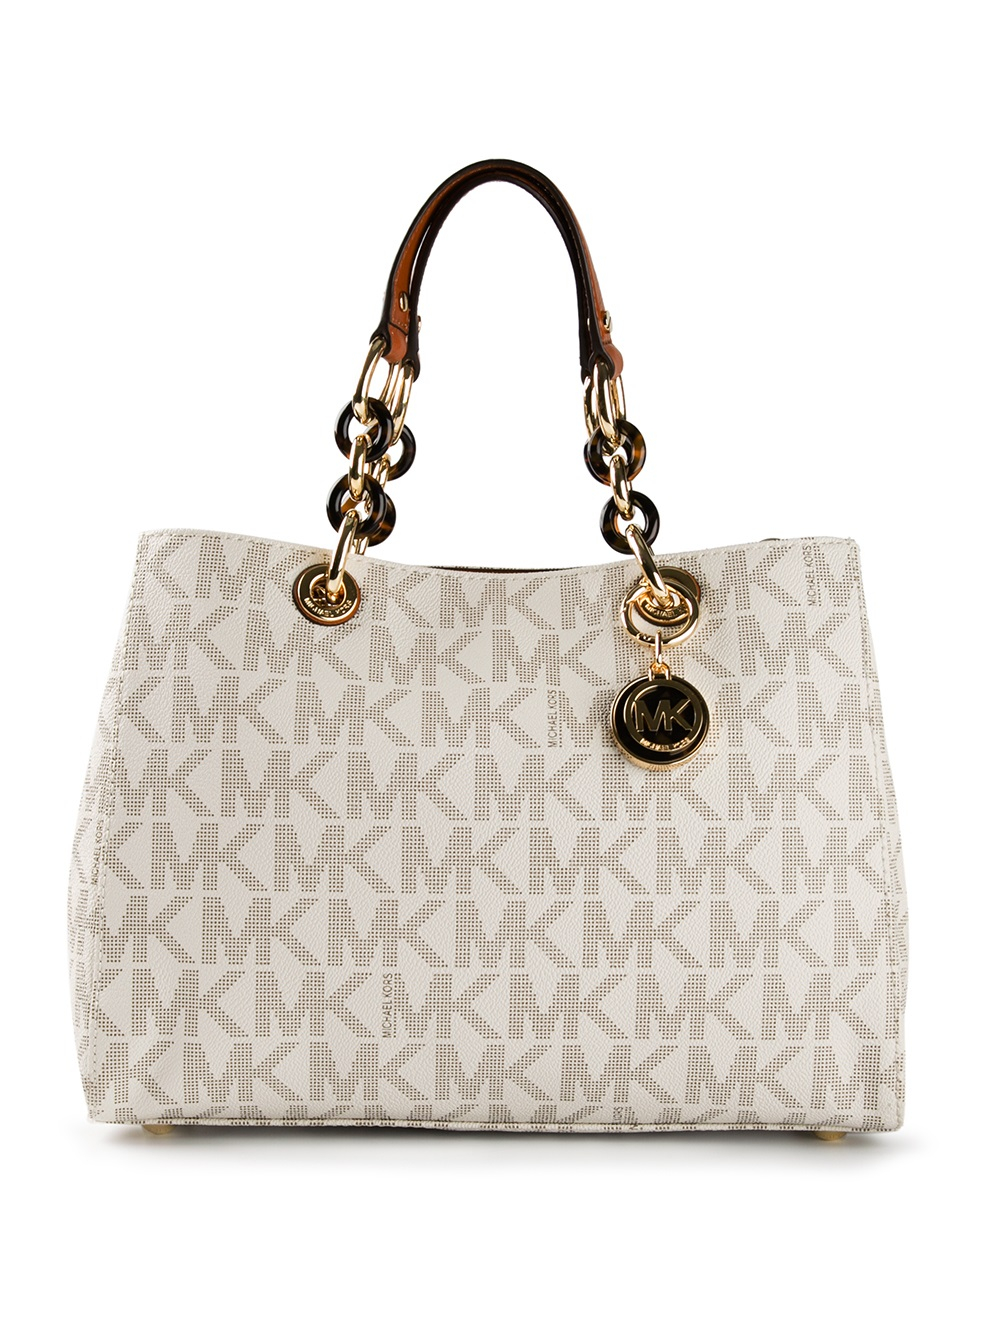 Michael Kors, Bags, Michael Kors White Purse With Gold Chain Handle